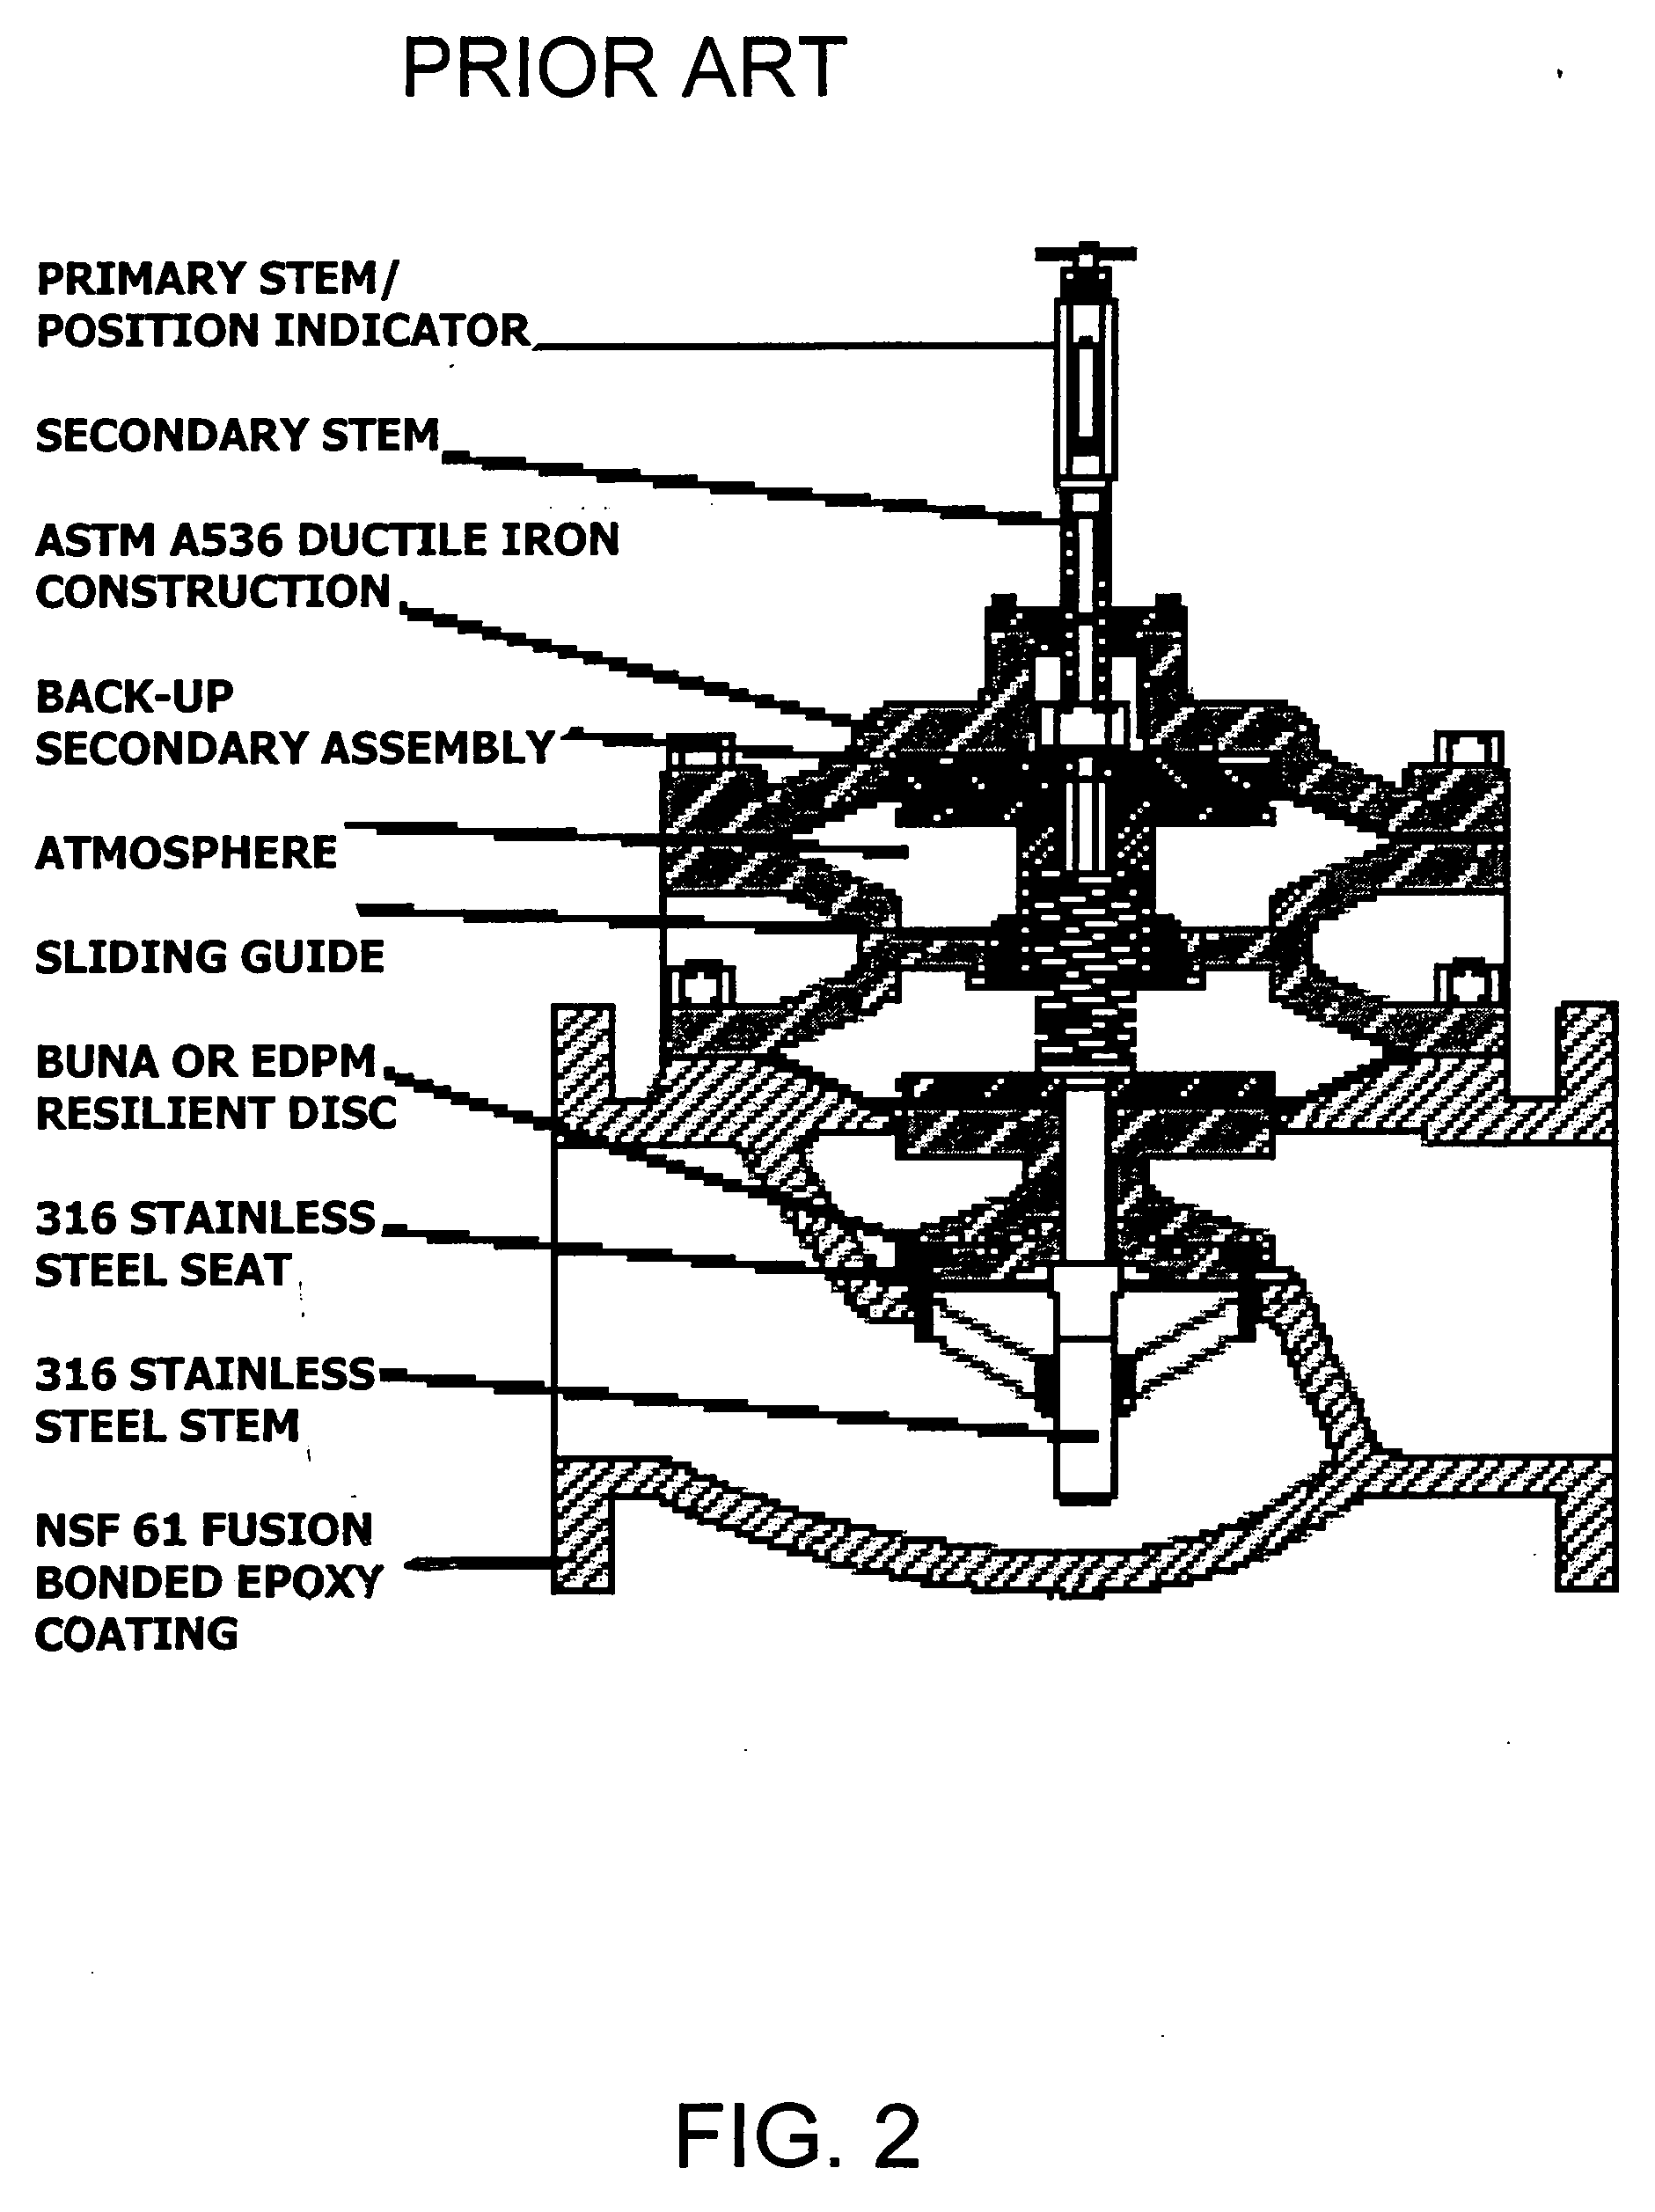 Hydraulic control valve with integrated dual actuators